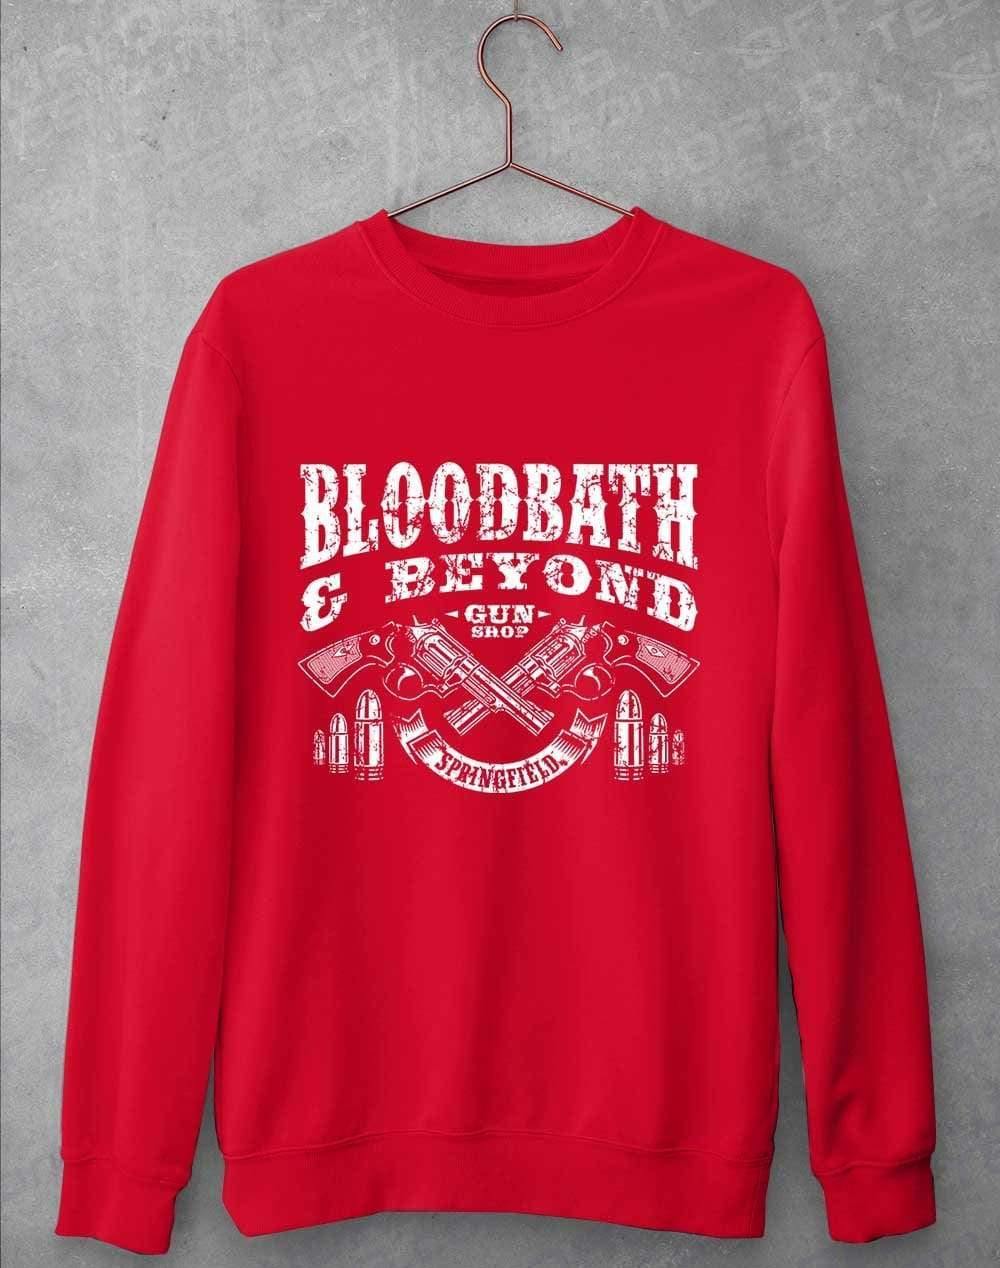 Bloodbath and Beyond Sweatshirt S / Fire Red  - Off World Tees